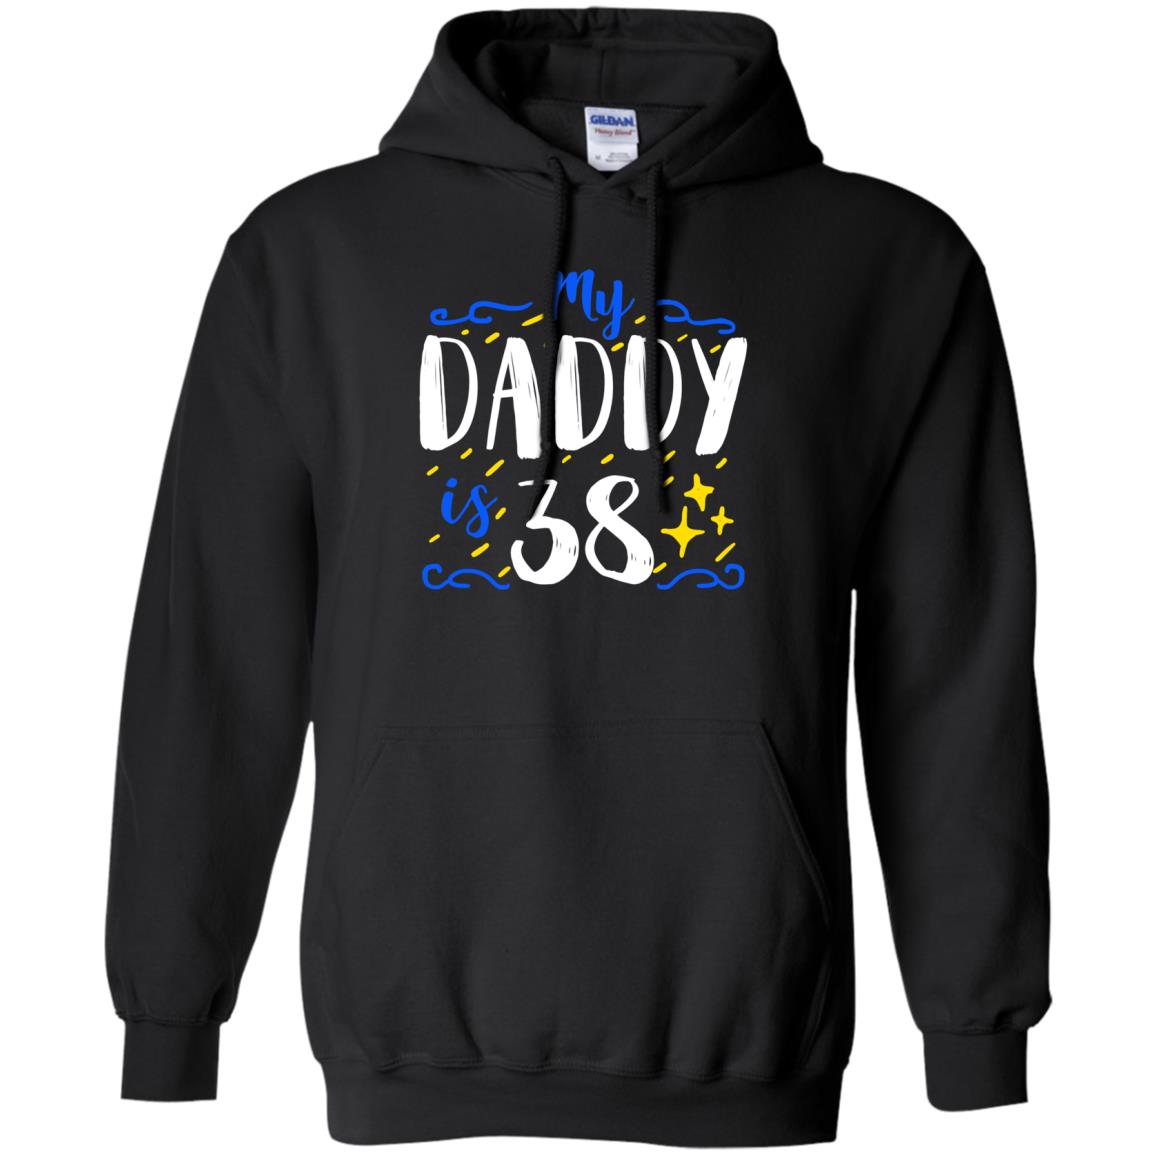 My Daddy Is 38 38th Birthday Daddy Shirt For Sons Or DaughtersG185 Gildan Pullover Hoodie 8 oz.